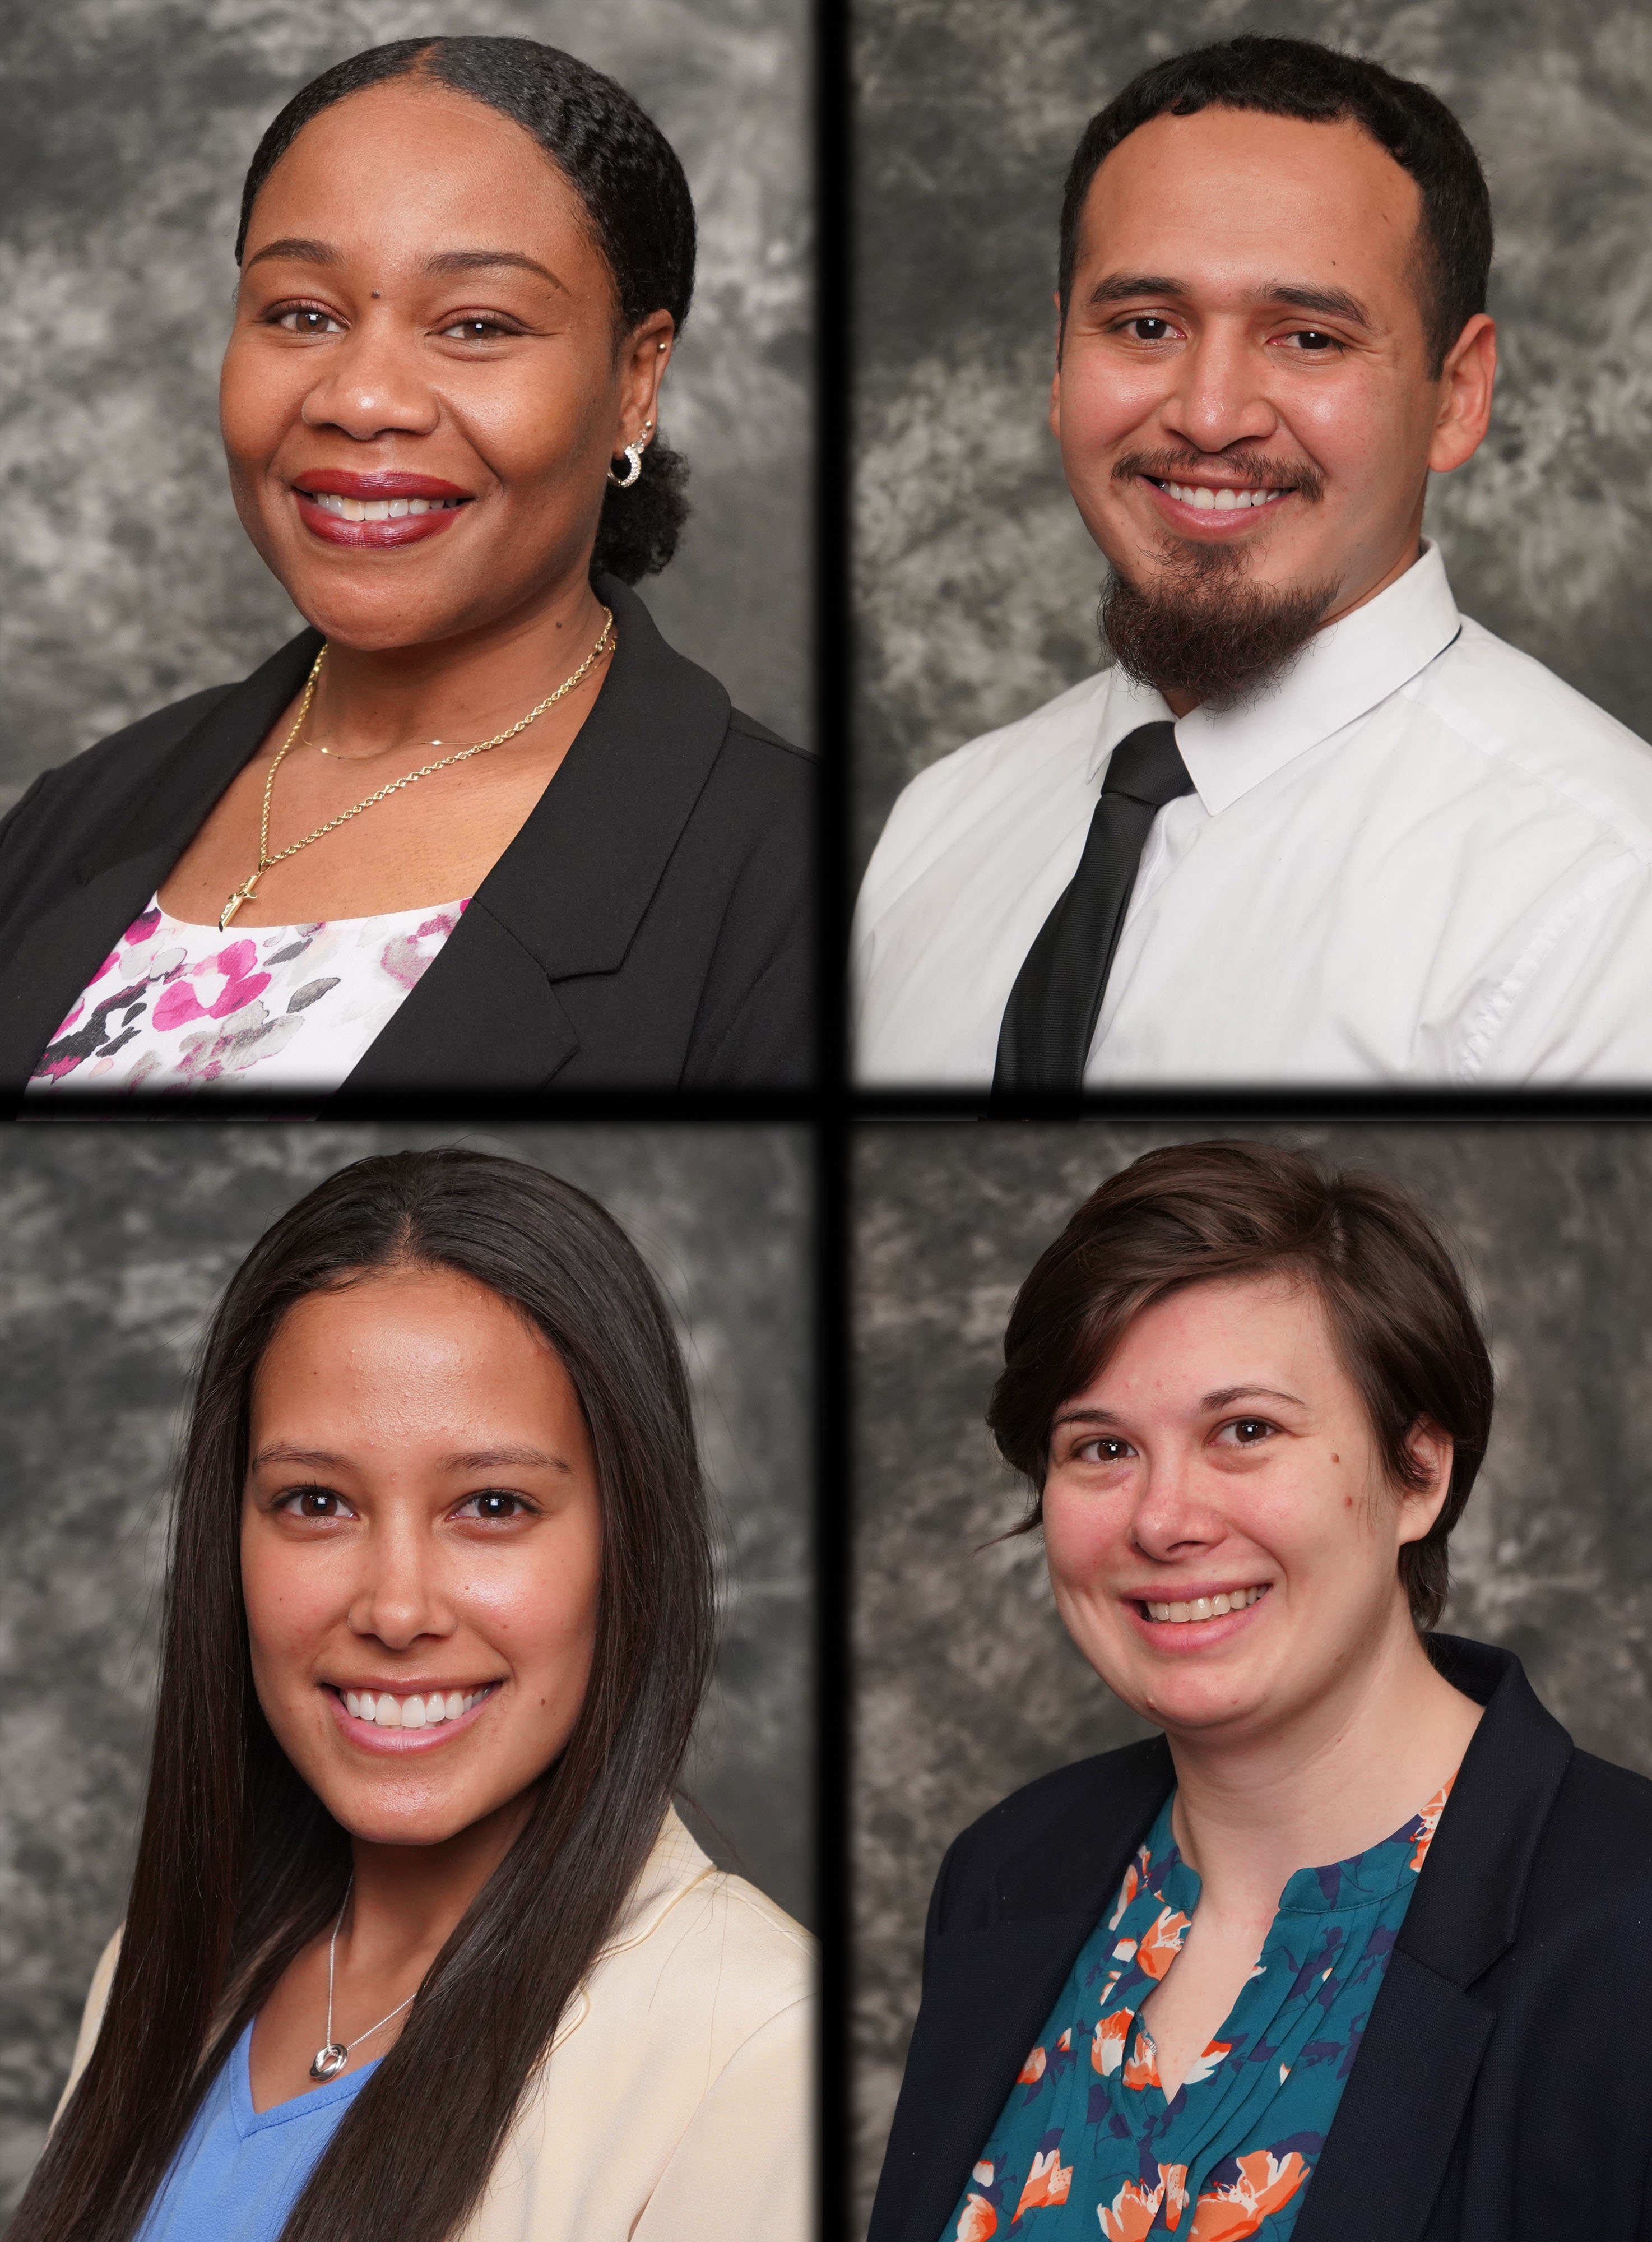 The students chosen as semi-finalists for GNTC's GOAL award are (top row, left to right) Tressa Brown, Jose Gonzalez, (bottom row, left to right) Stephanie Kuhrt and Brittany Wattenbarger.   